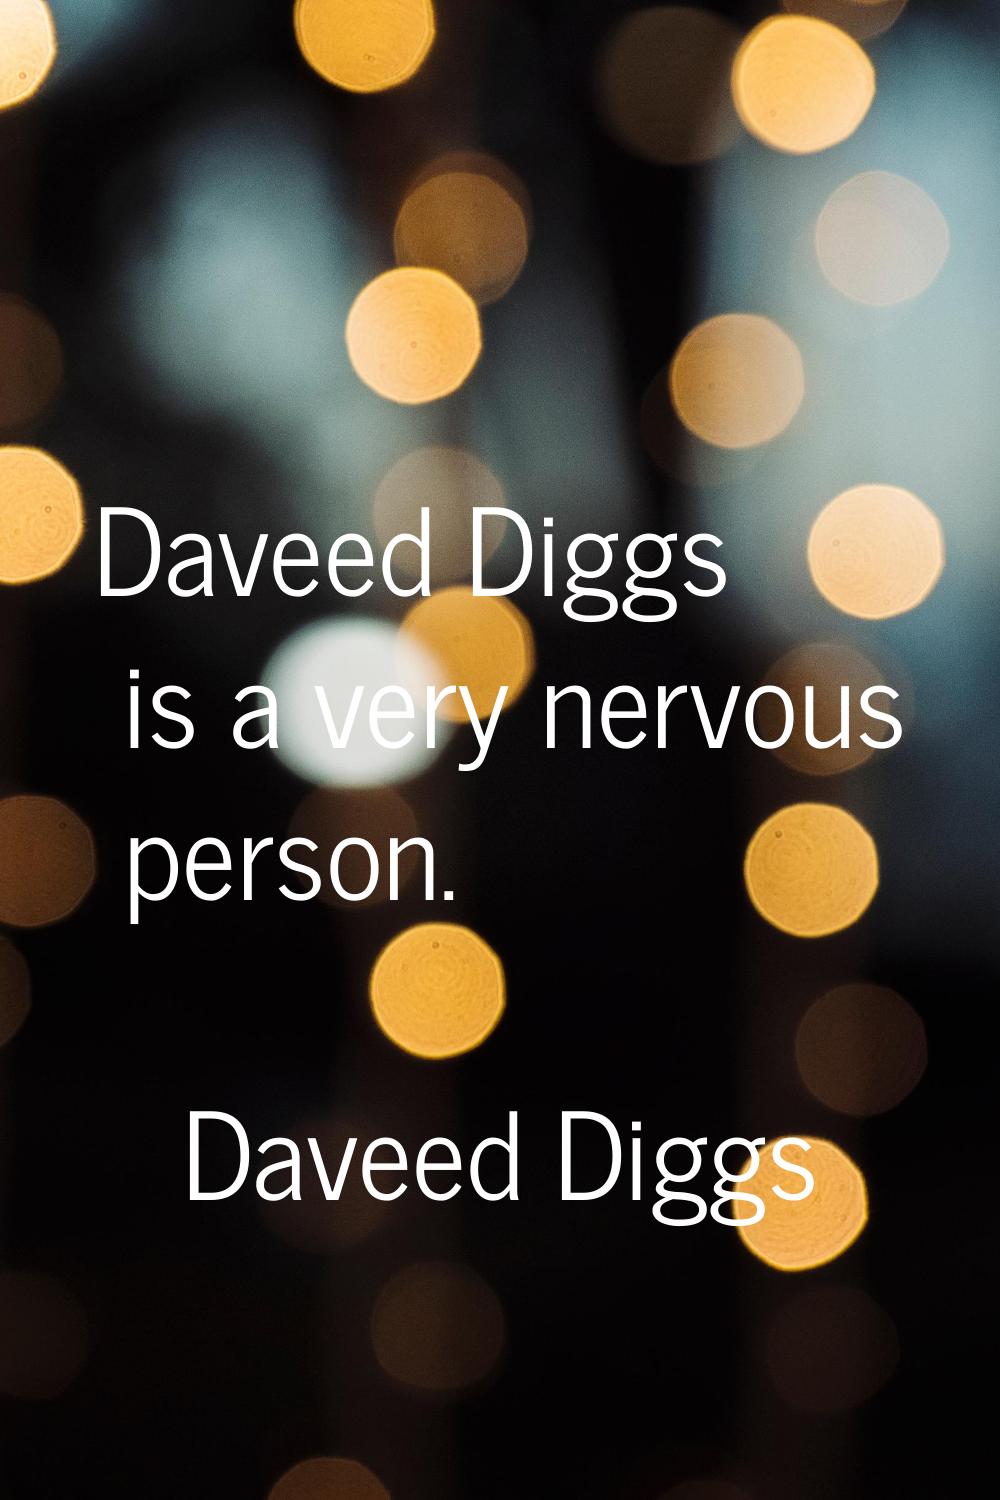 Daveed Diggs is a very nervous person.